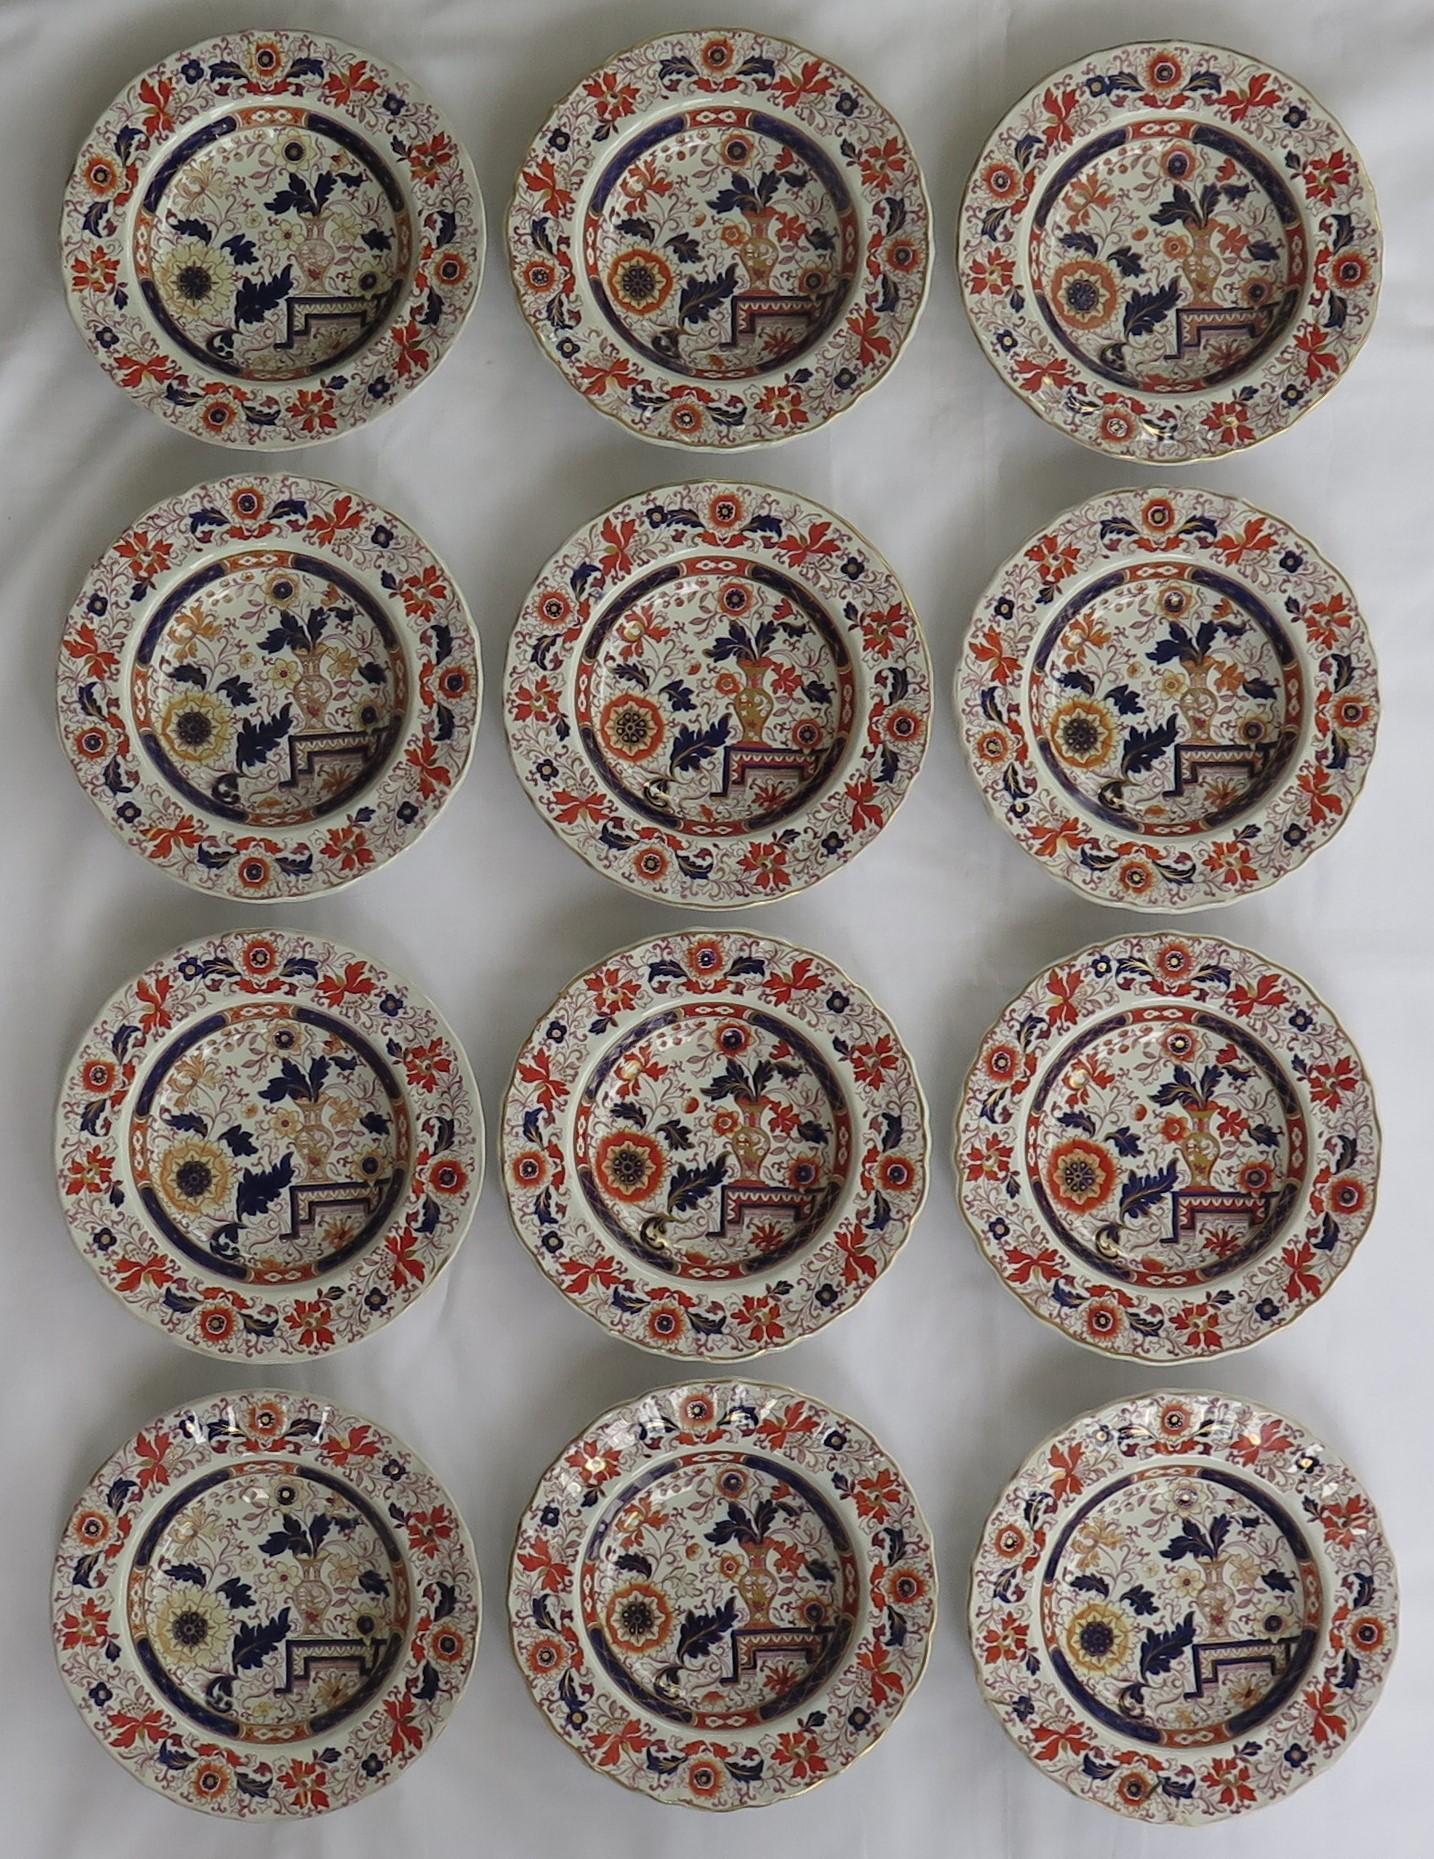 This is a good set of Twelve Mason's ( Ashworth Bros.) ironstone Bowls, all dating to the mid Victorian period of the 19th century, at the time when Mason's was owned and controlled by George L Ashworth after the bankruptcy of C J Mason in